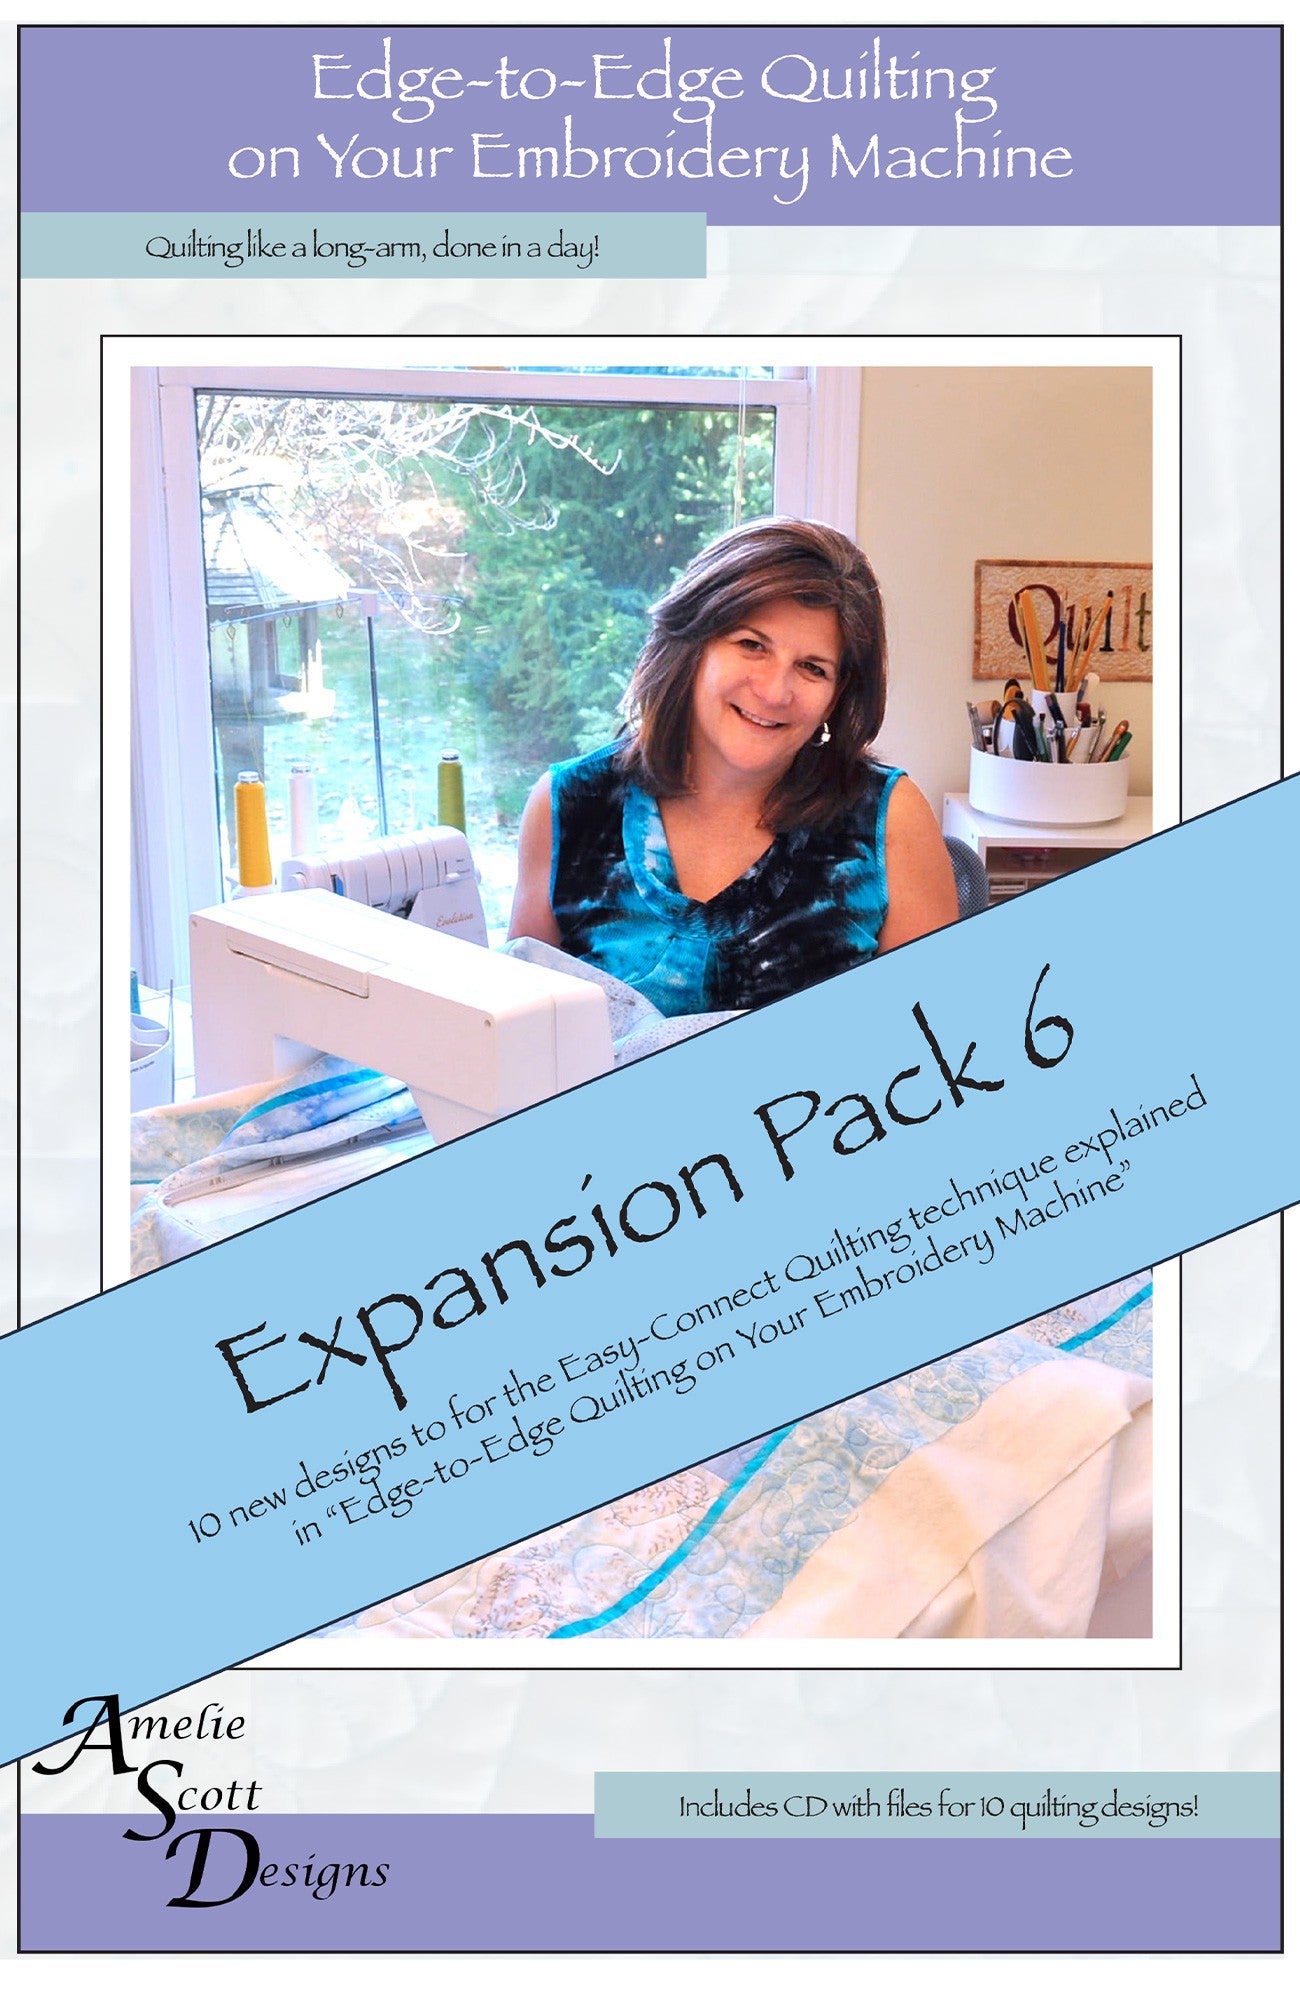 Edge-To-Edge Quilting On Your Embroidery Machine Expansion Pack 6 by Amelie Scott Designs